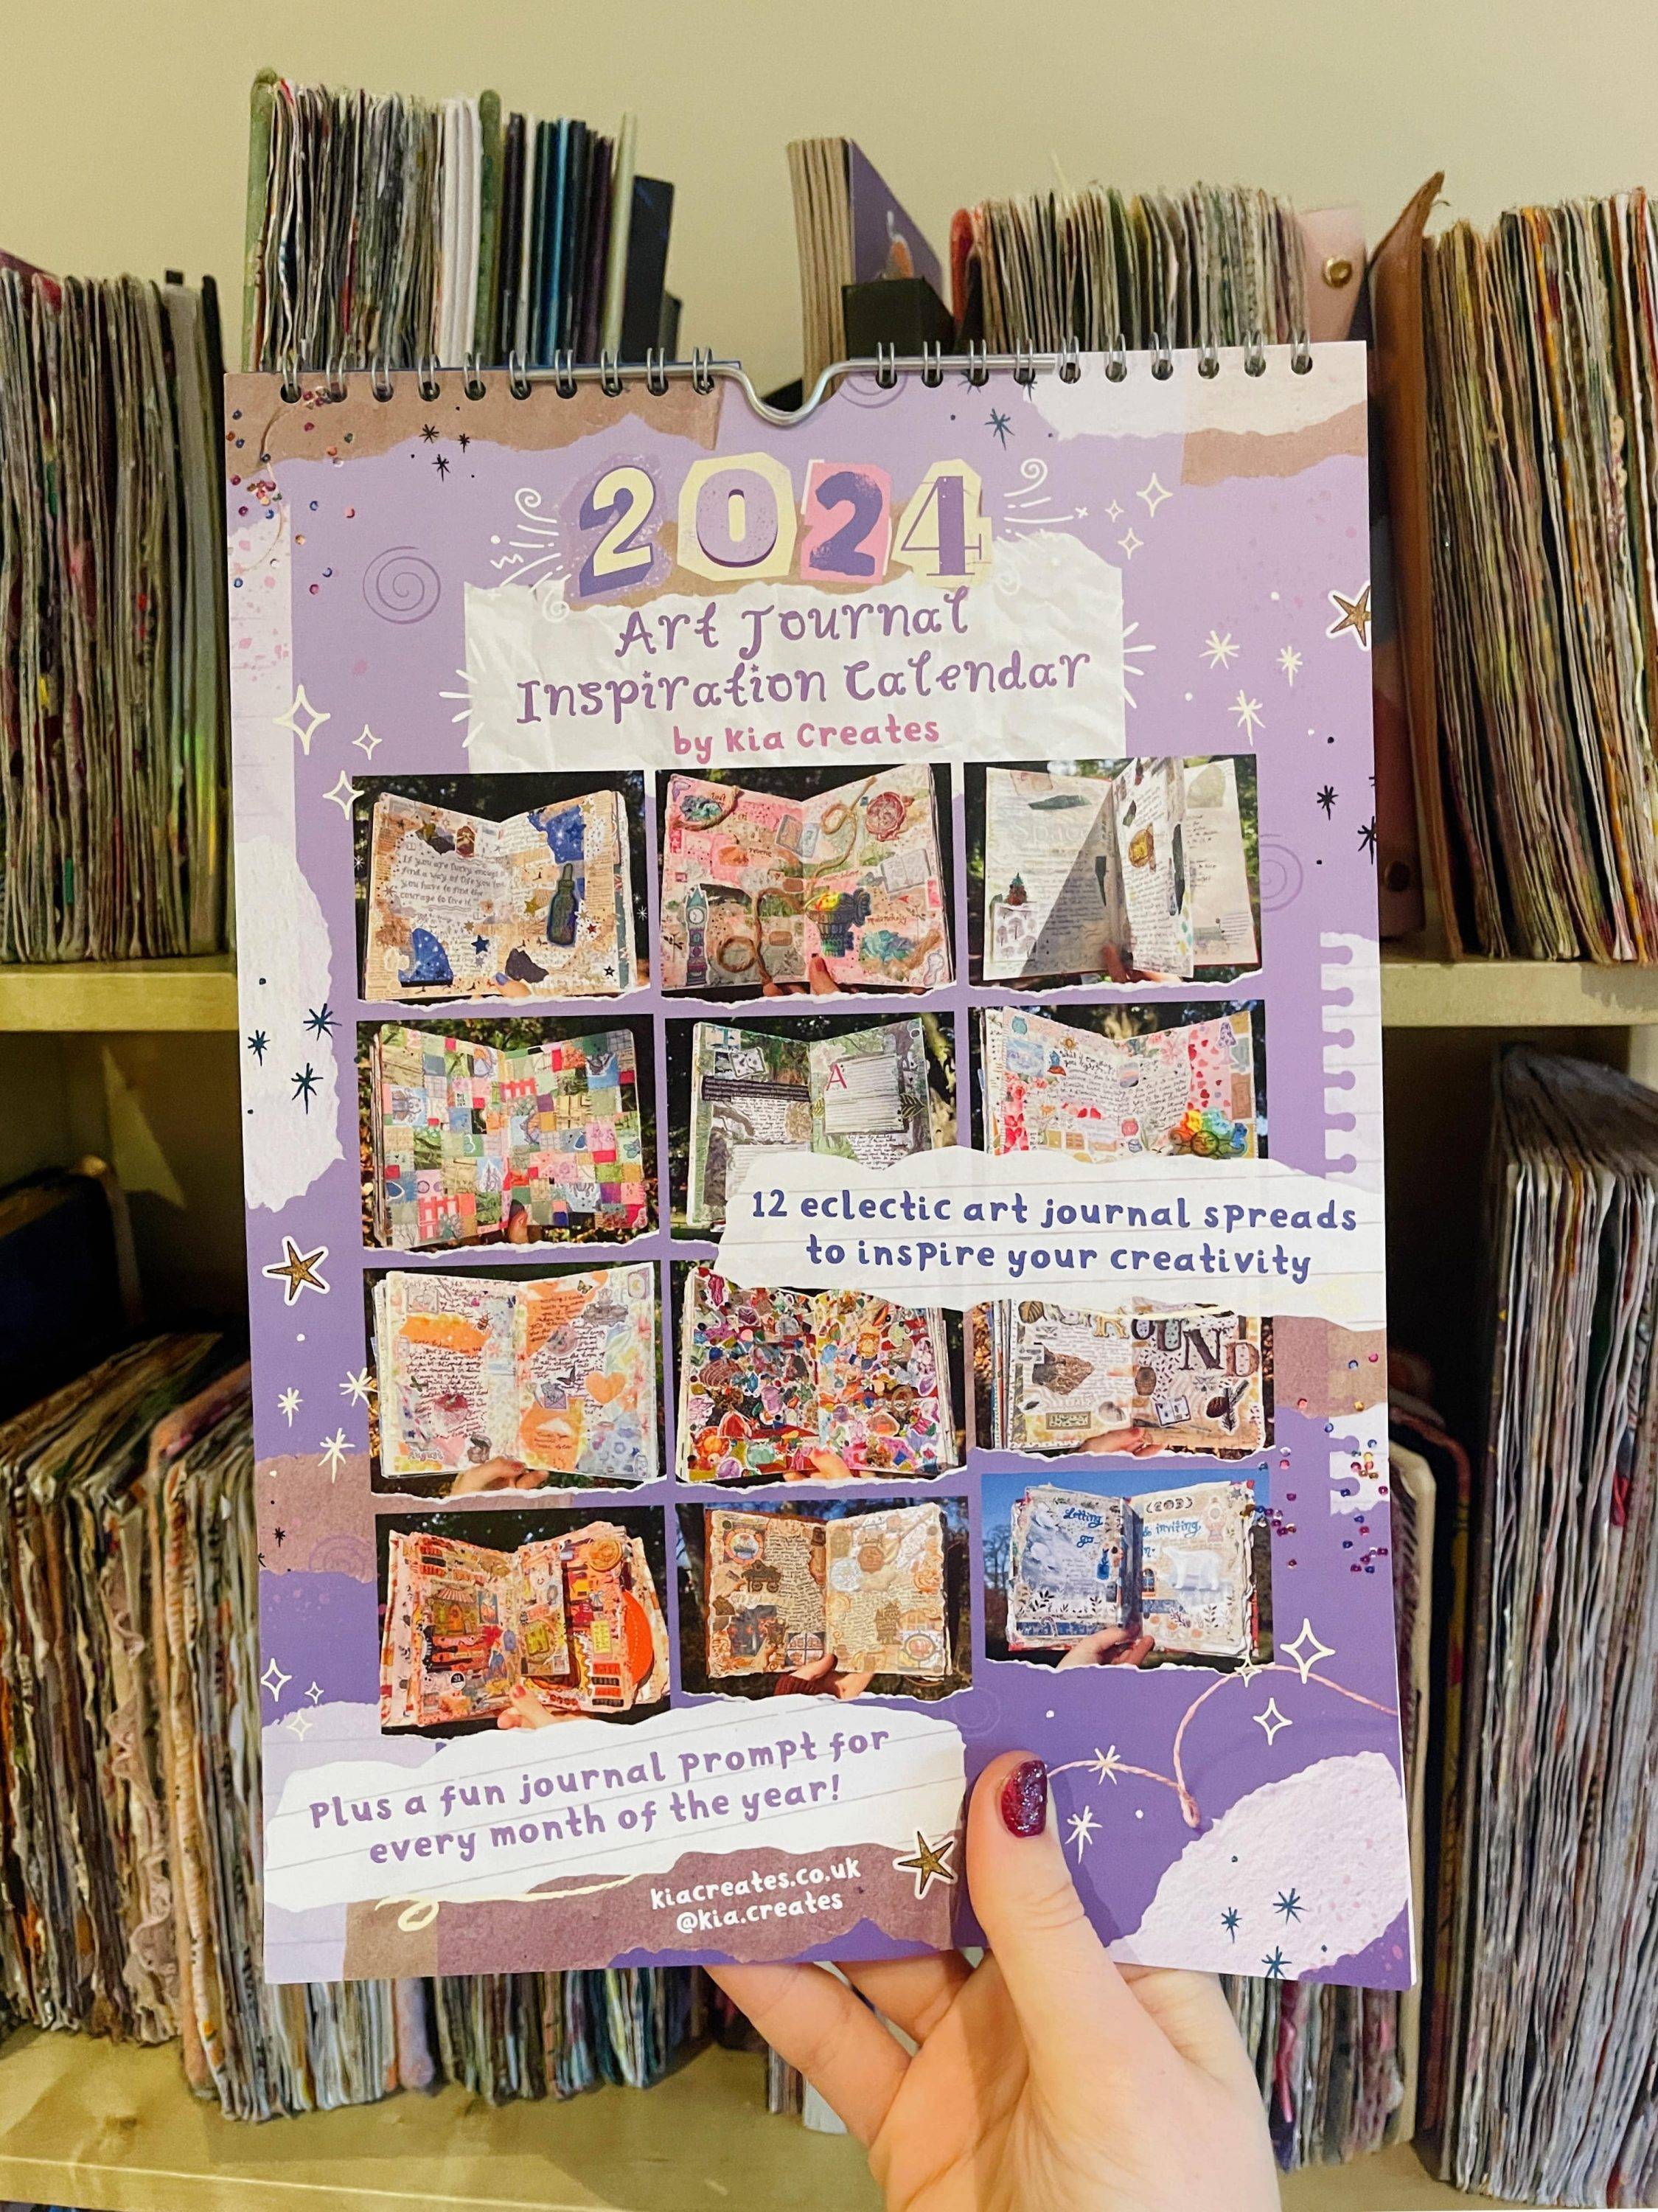 2024 art journal calendar – art journal ideas inspiration and prompts for the yeat – creative journaling gift by Kia Creates – wall calendar (4)